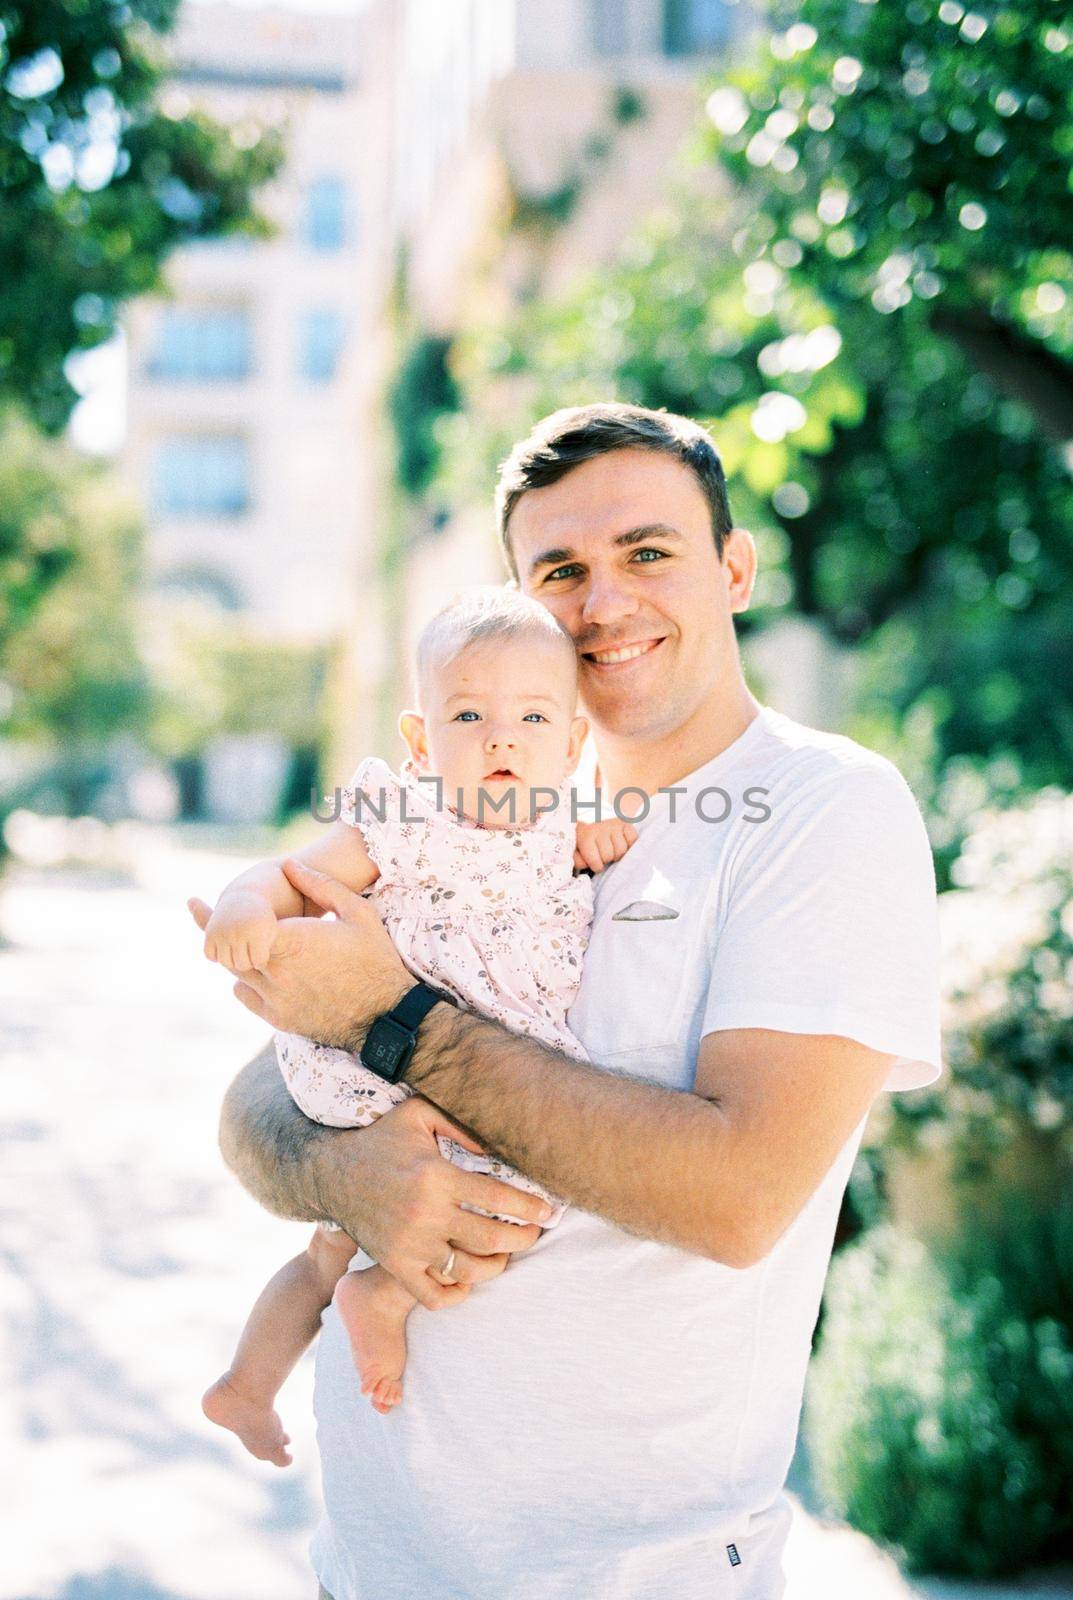 Smiling dad holds a little girl in his arms on the street. Portrait by Nadtochiy